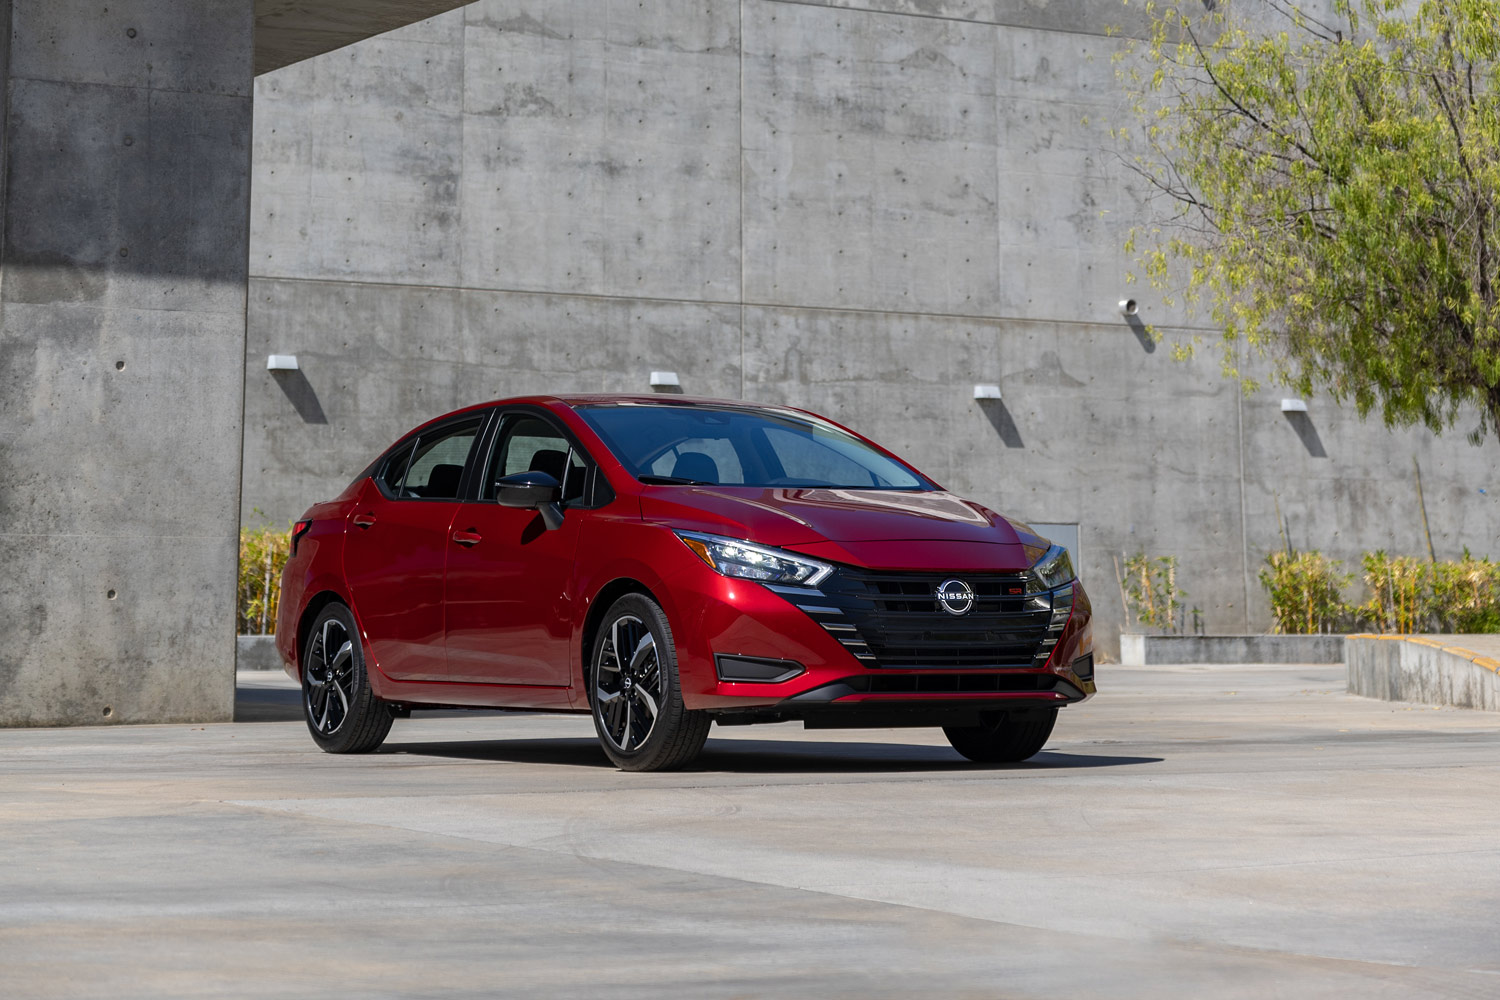 2023 Nissan Versa in red parked in front of concrete building.